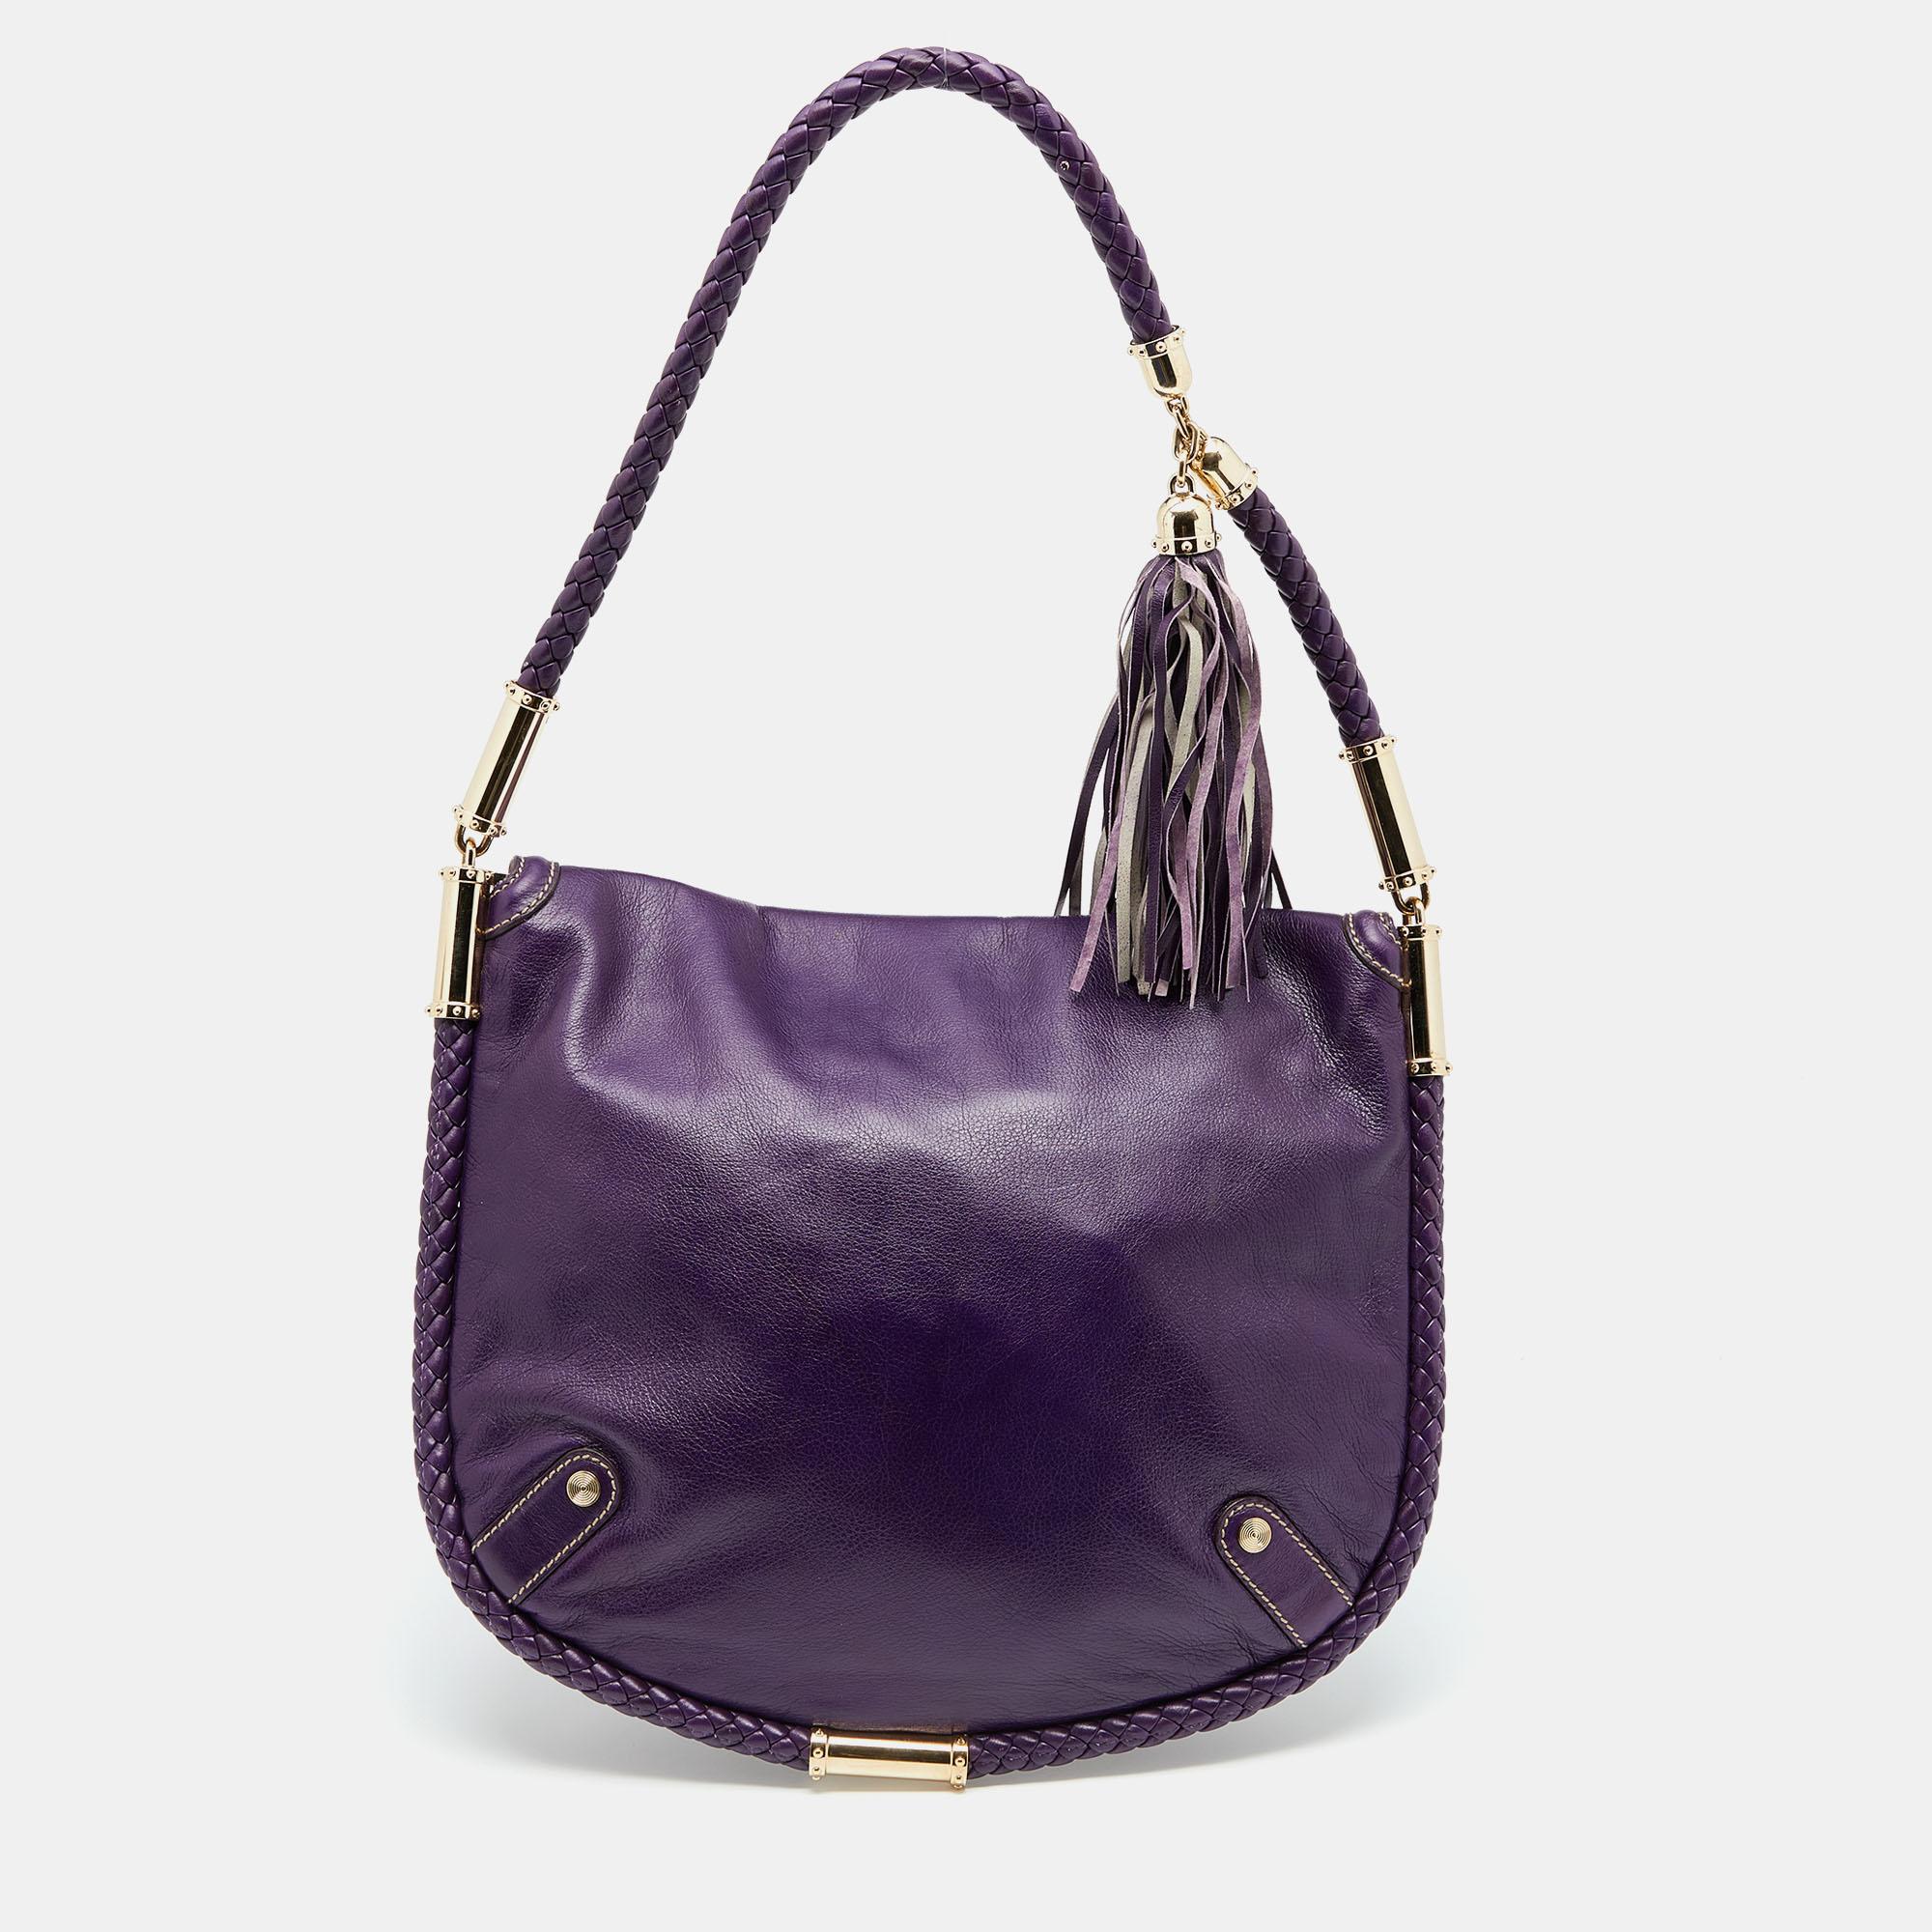 Simple details, high quality, and everyday convenience mark this Britt shoulder bag by Gucci. The bag is made of purple leather and it features a single handle, a gold-tone GG logo on the front, and a spacious interior.

Includes: Original Dustbag